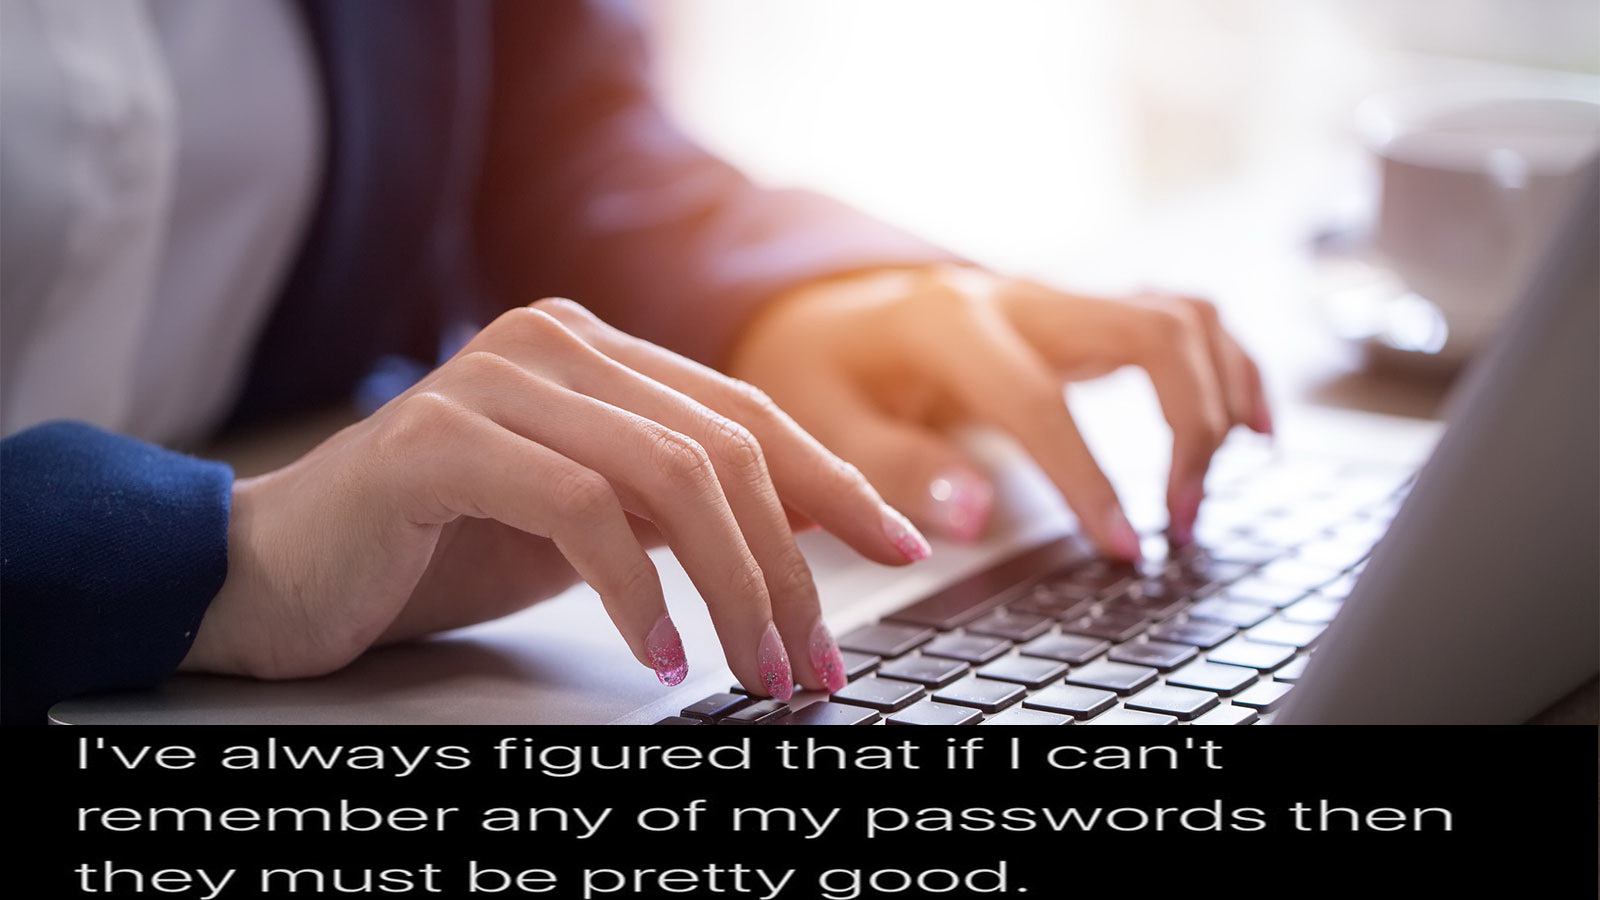 typing on computer - I've always figured that if I can't remember any of my passwords then they must be pretty good.